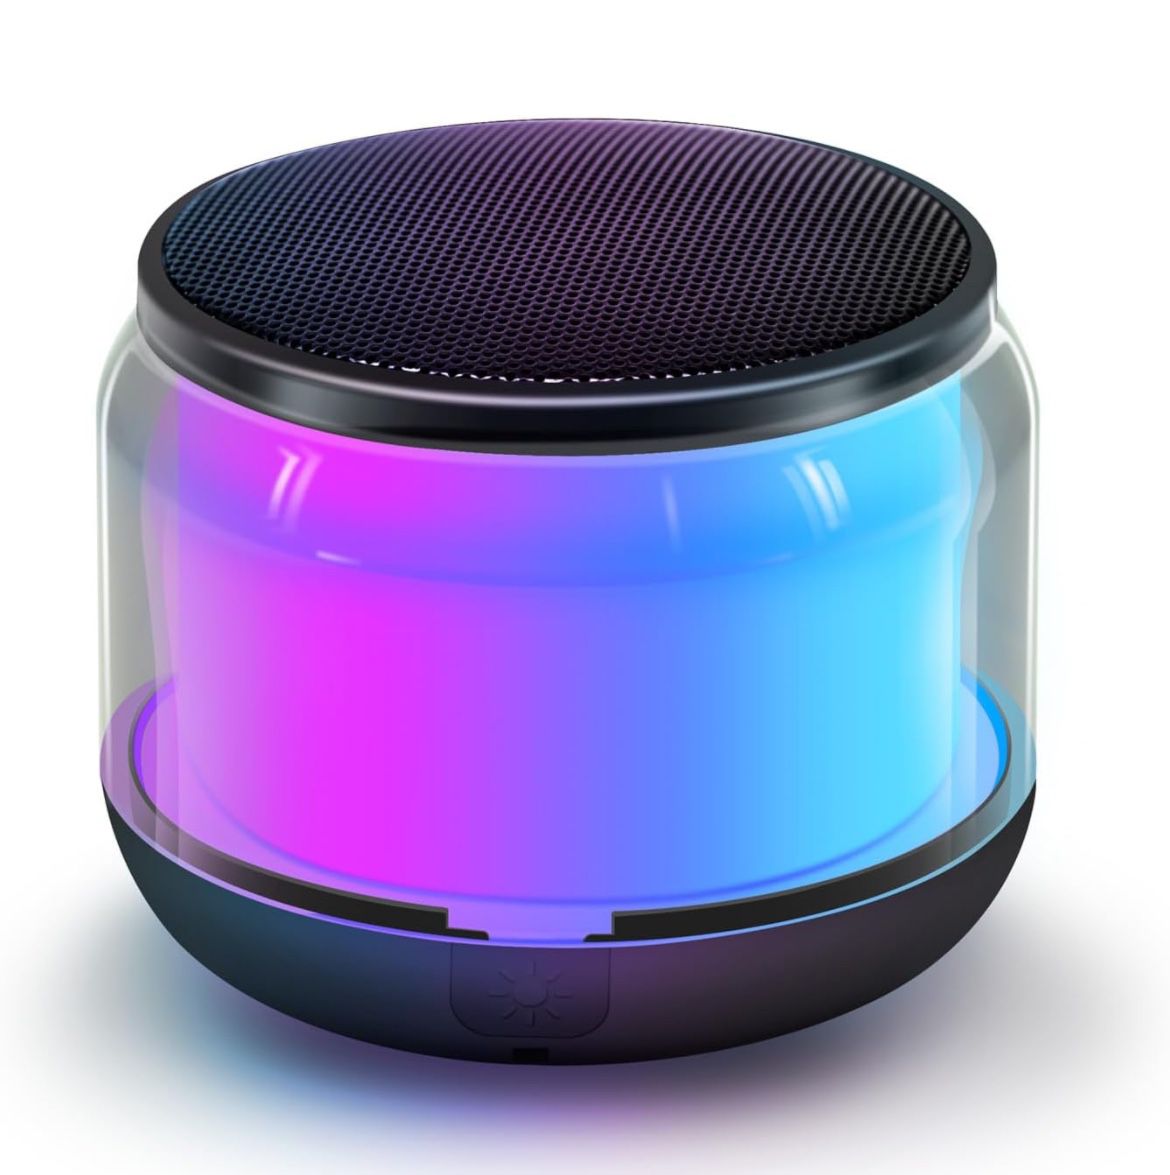 Adnmroku Portable Bluetooth Speakers,Mini Wireless Speaker FM Radio, Outdoor Speakers, Stereo Sound Speaker 20H Playtime,with Colorful Flashing Lights